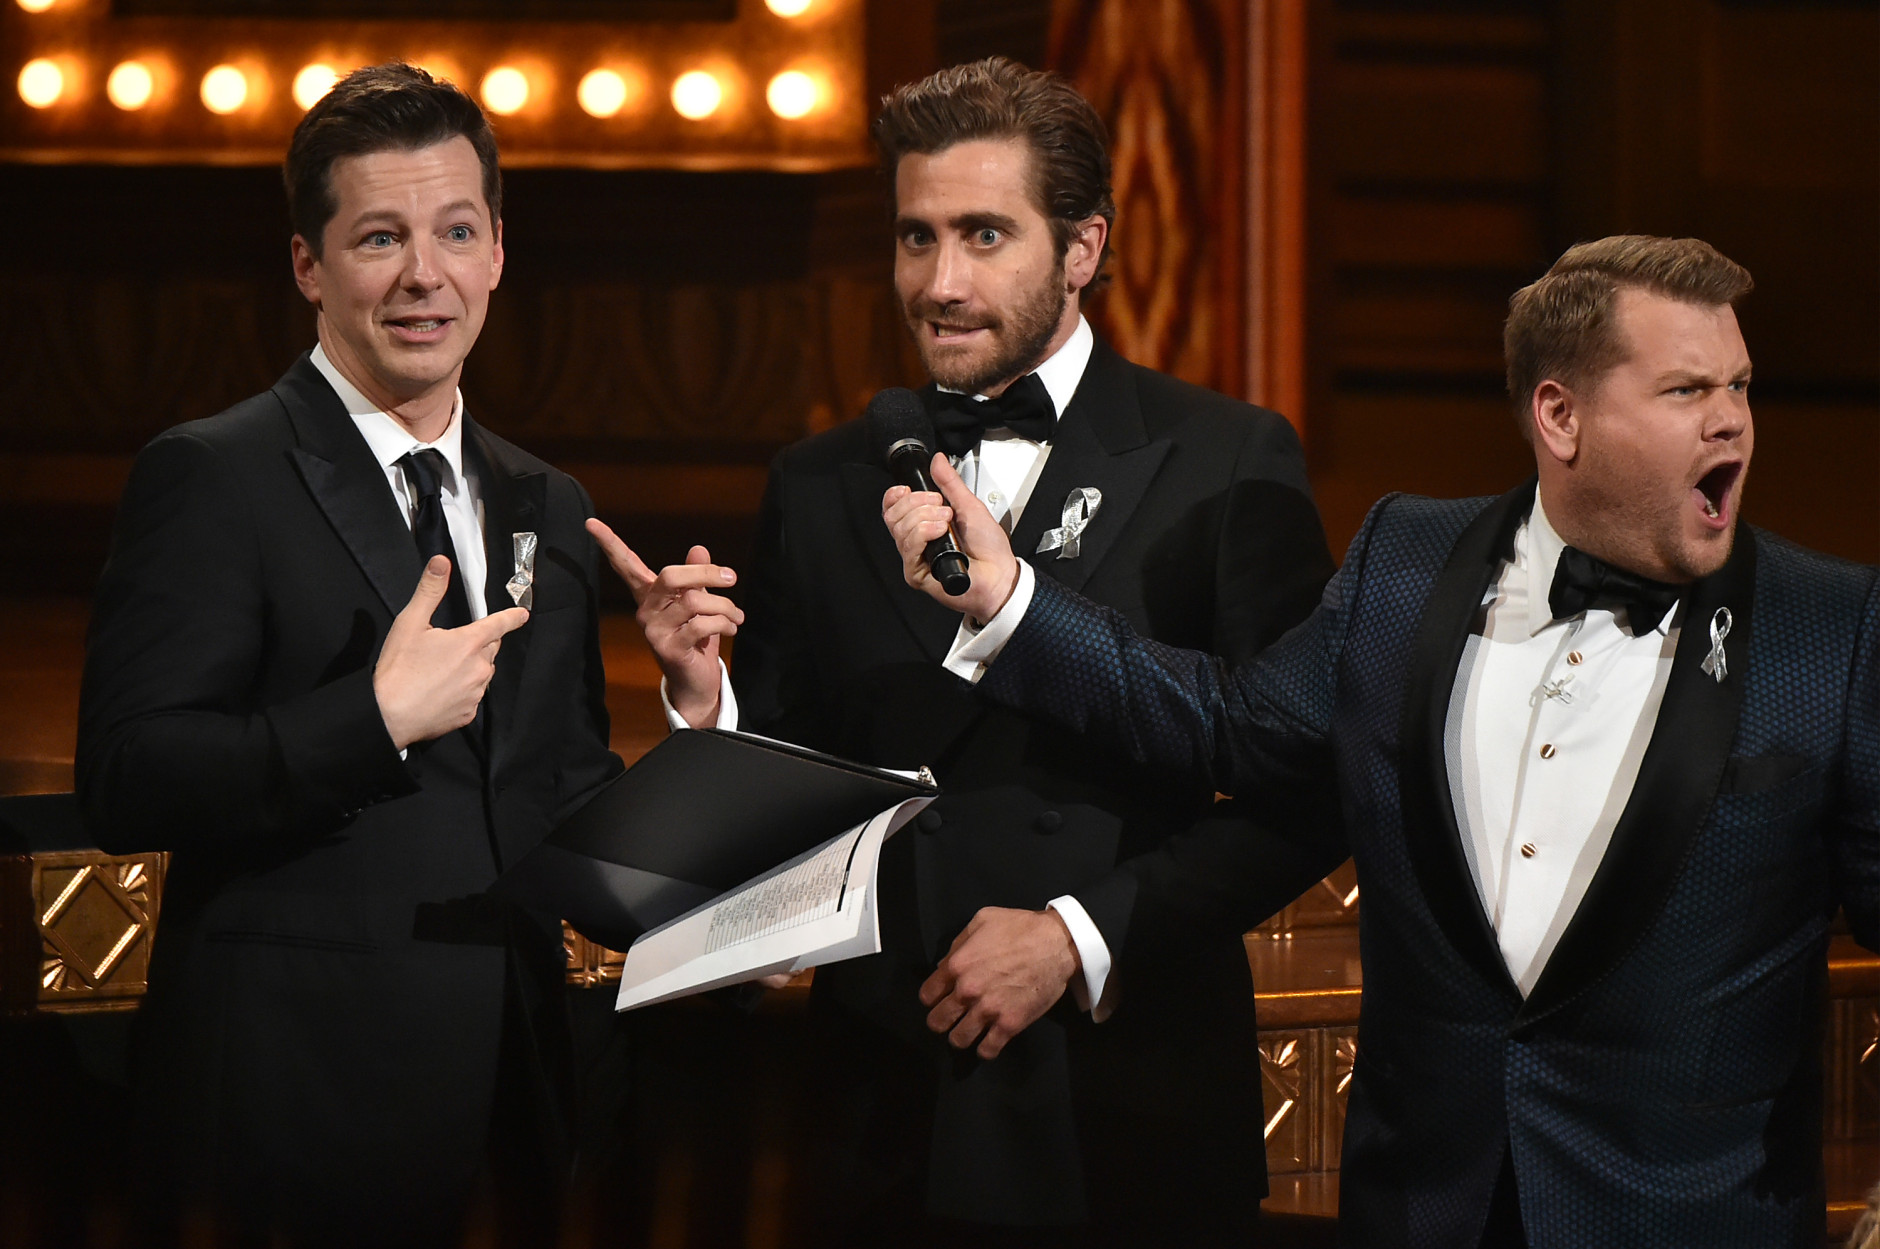 NEW YORK, NY - JUNE 12:  Presenter Sean Hayes and Jake Gyllenhaal speak onstage with host James Corden during the 70th Annual Tony Awards at The Beacon Theatre on June 12, 2016 in New York City.  (Photo by Theo Wargo/Getty Images for Tony Awards Productions)